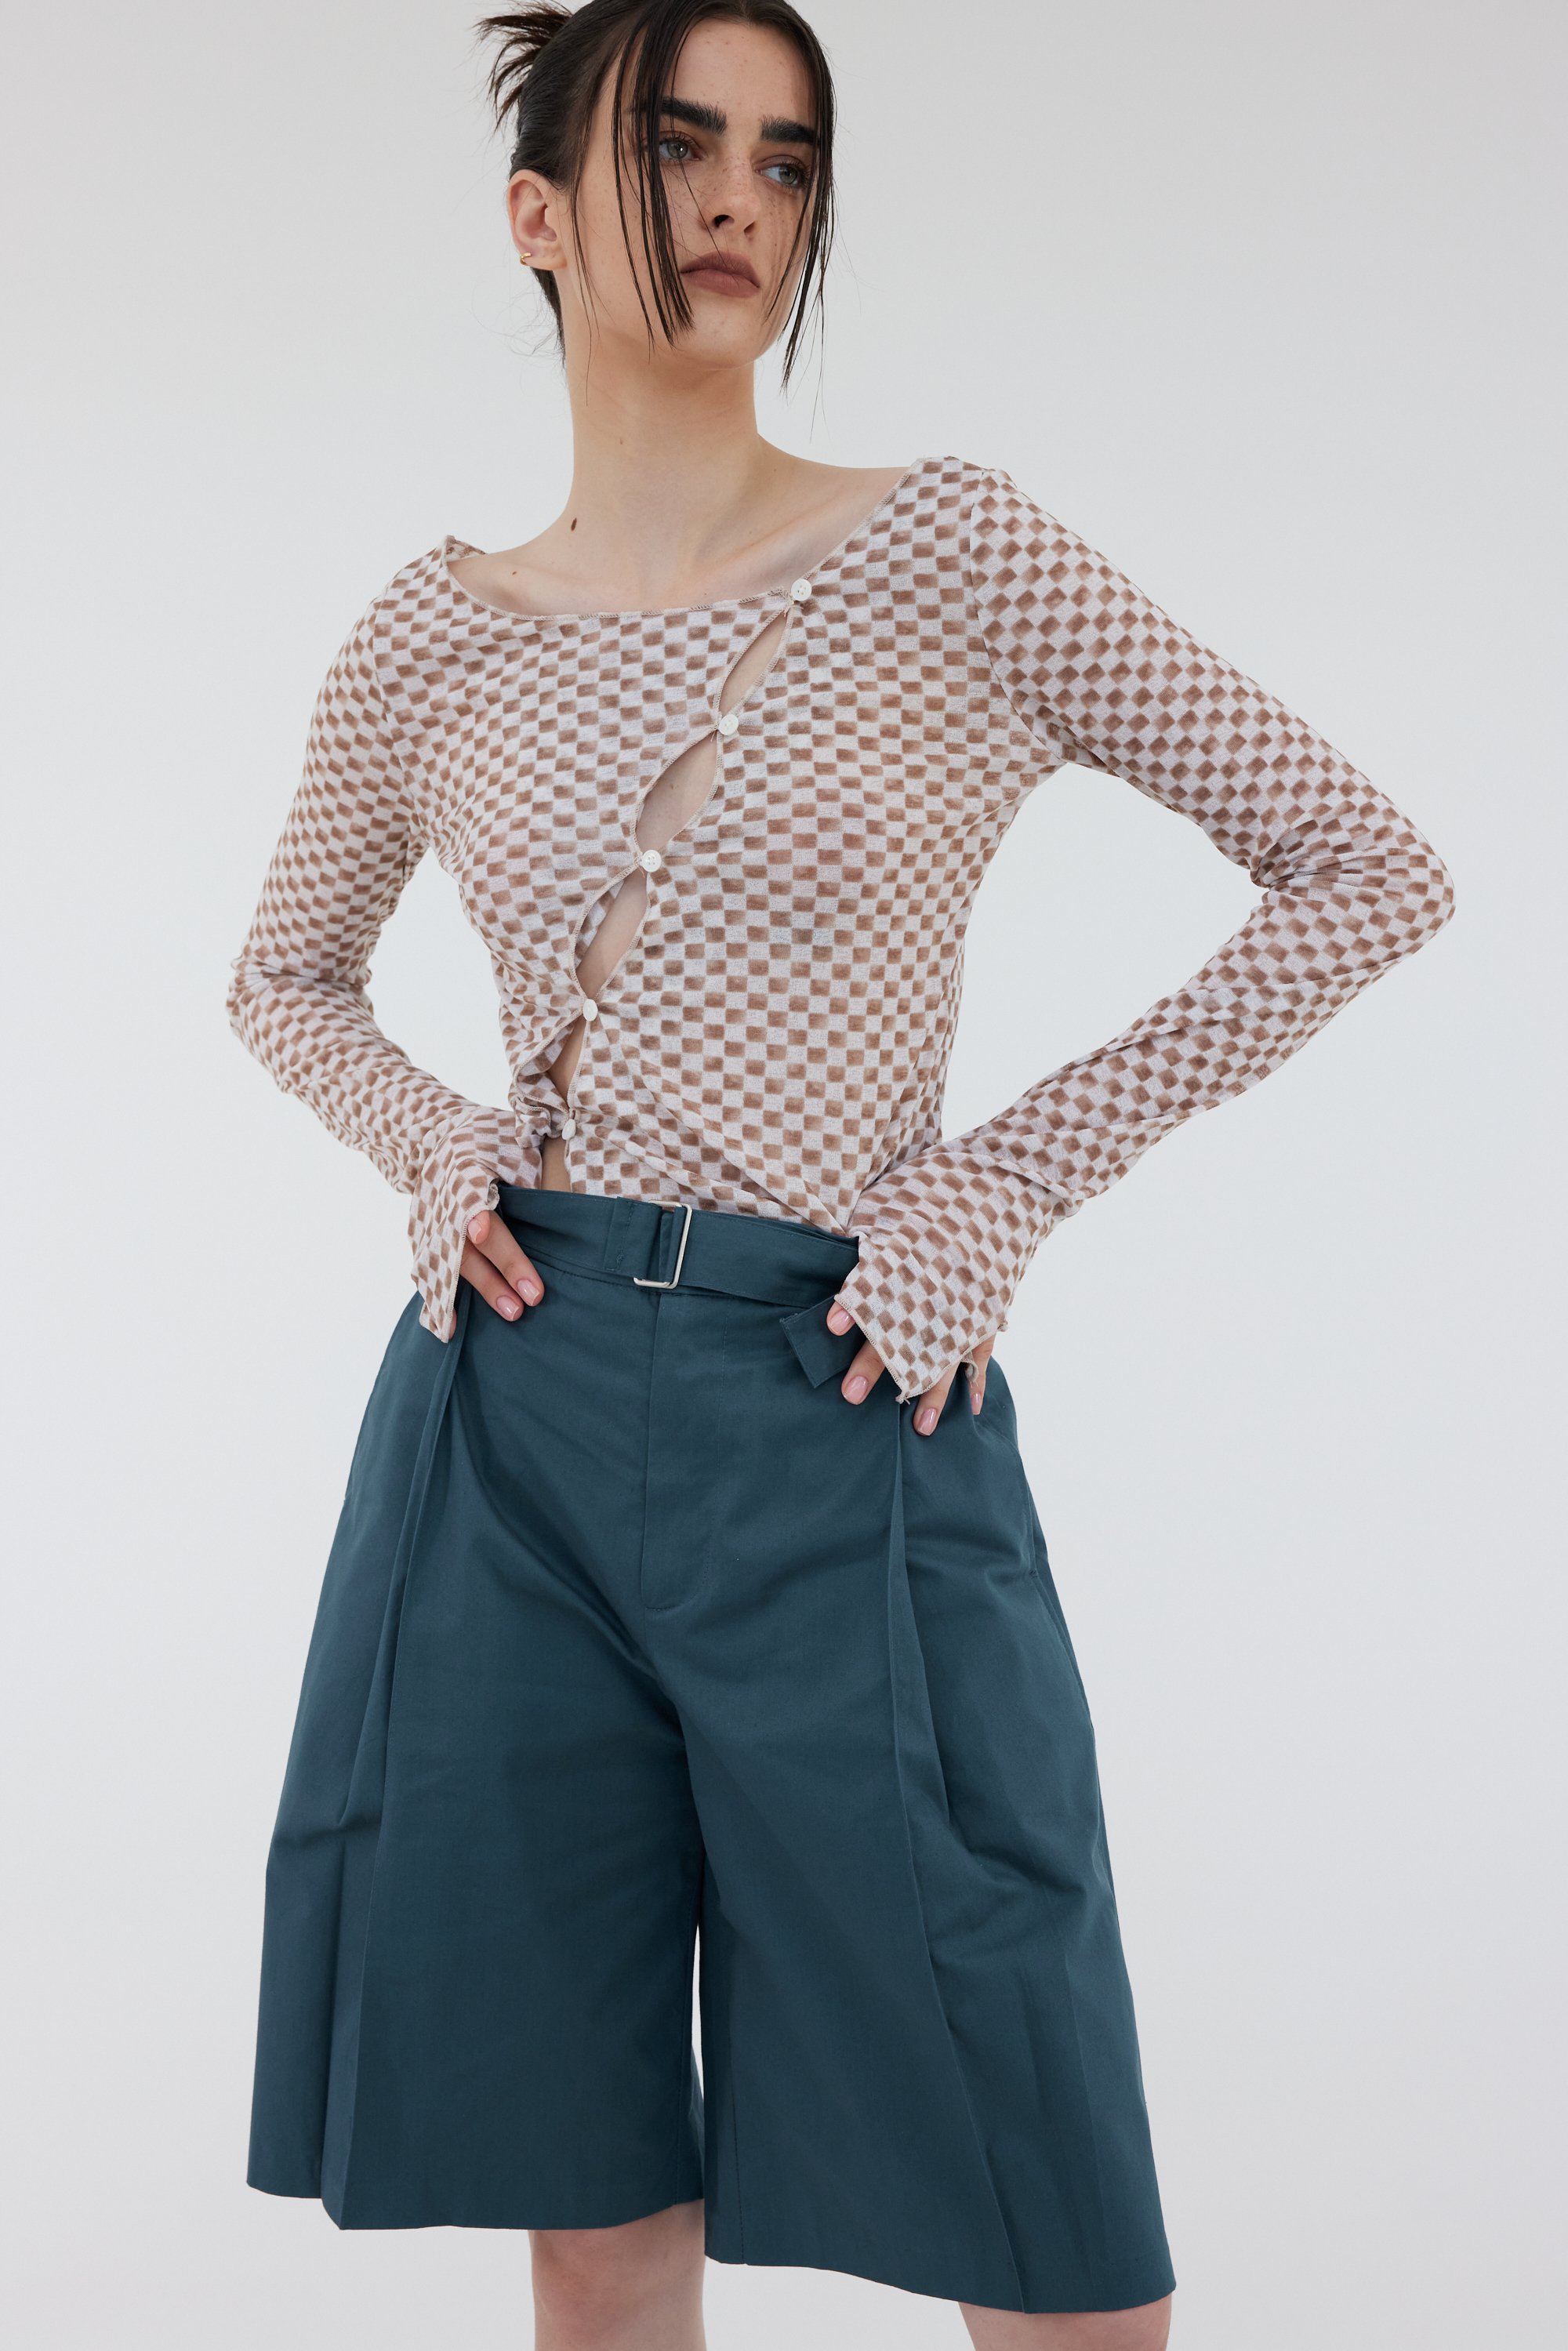 Source Unknown Diagonal Button Up Second-Skin Top, Milk Chocolate